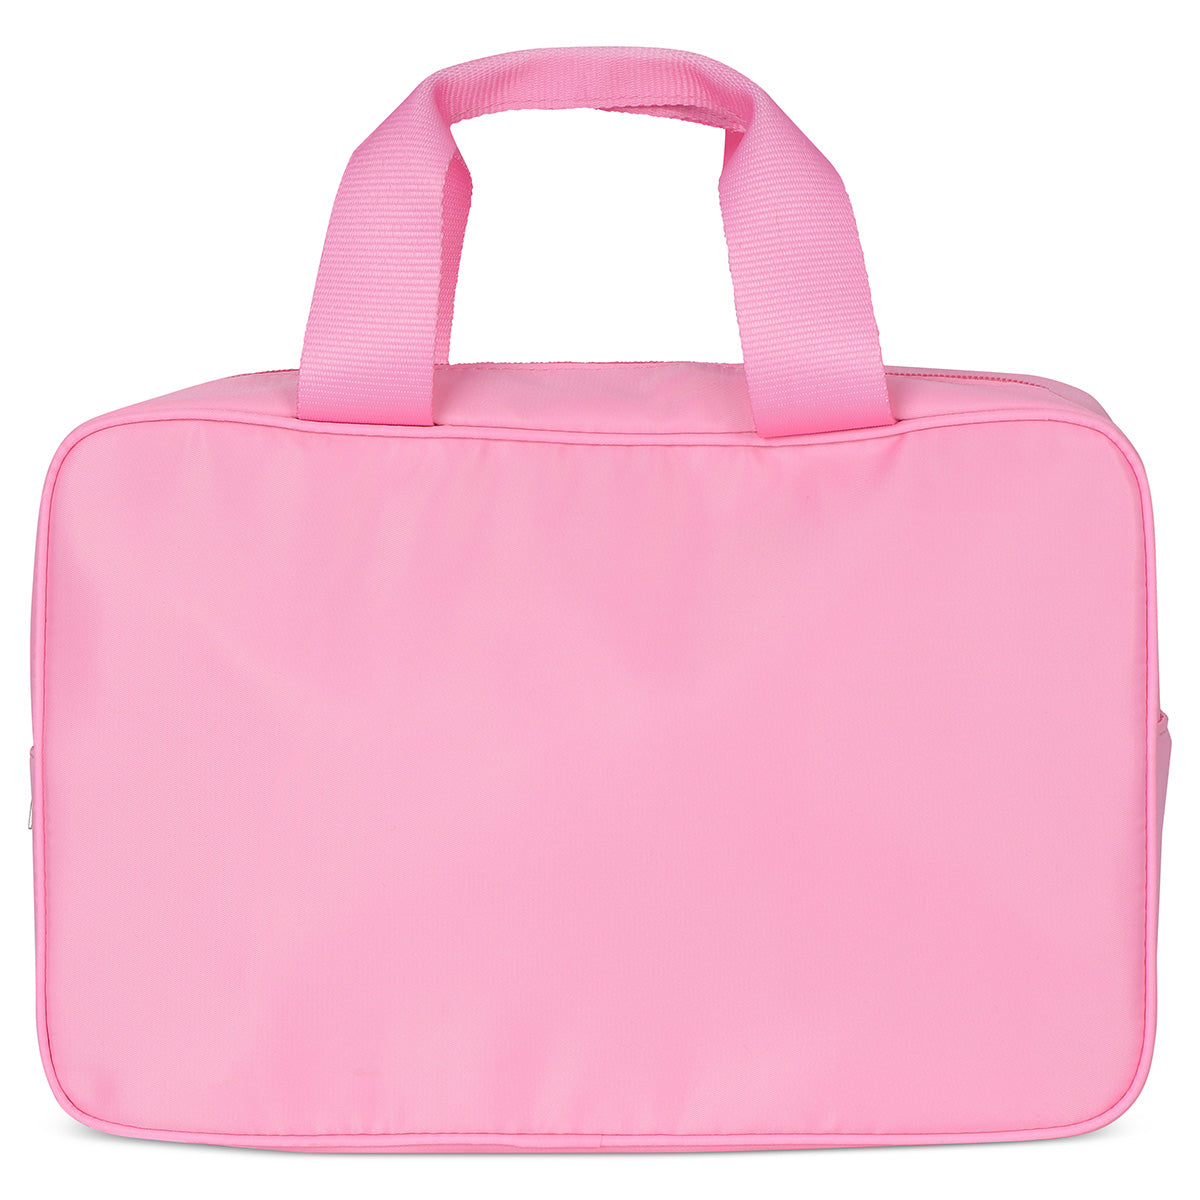 Pink Large Cosmetic Bag Cover